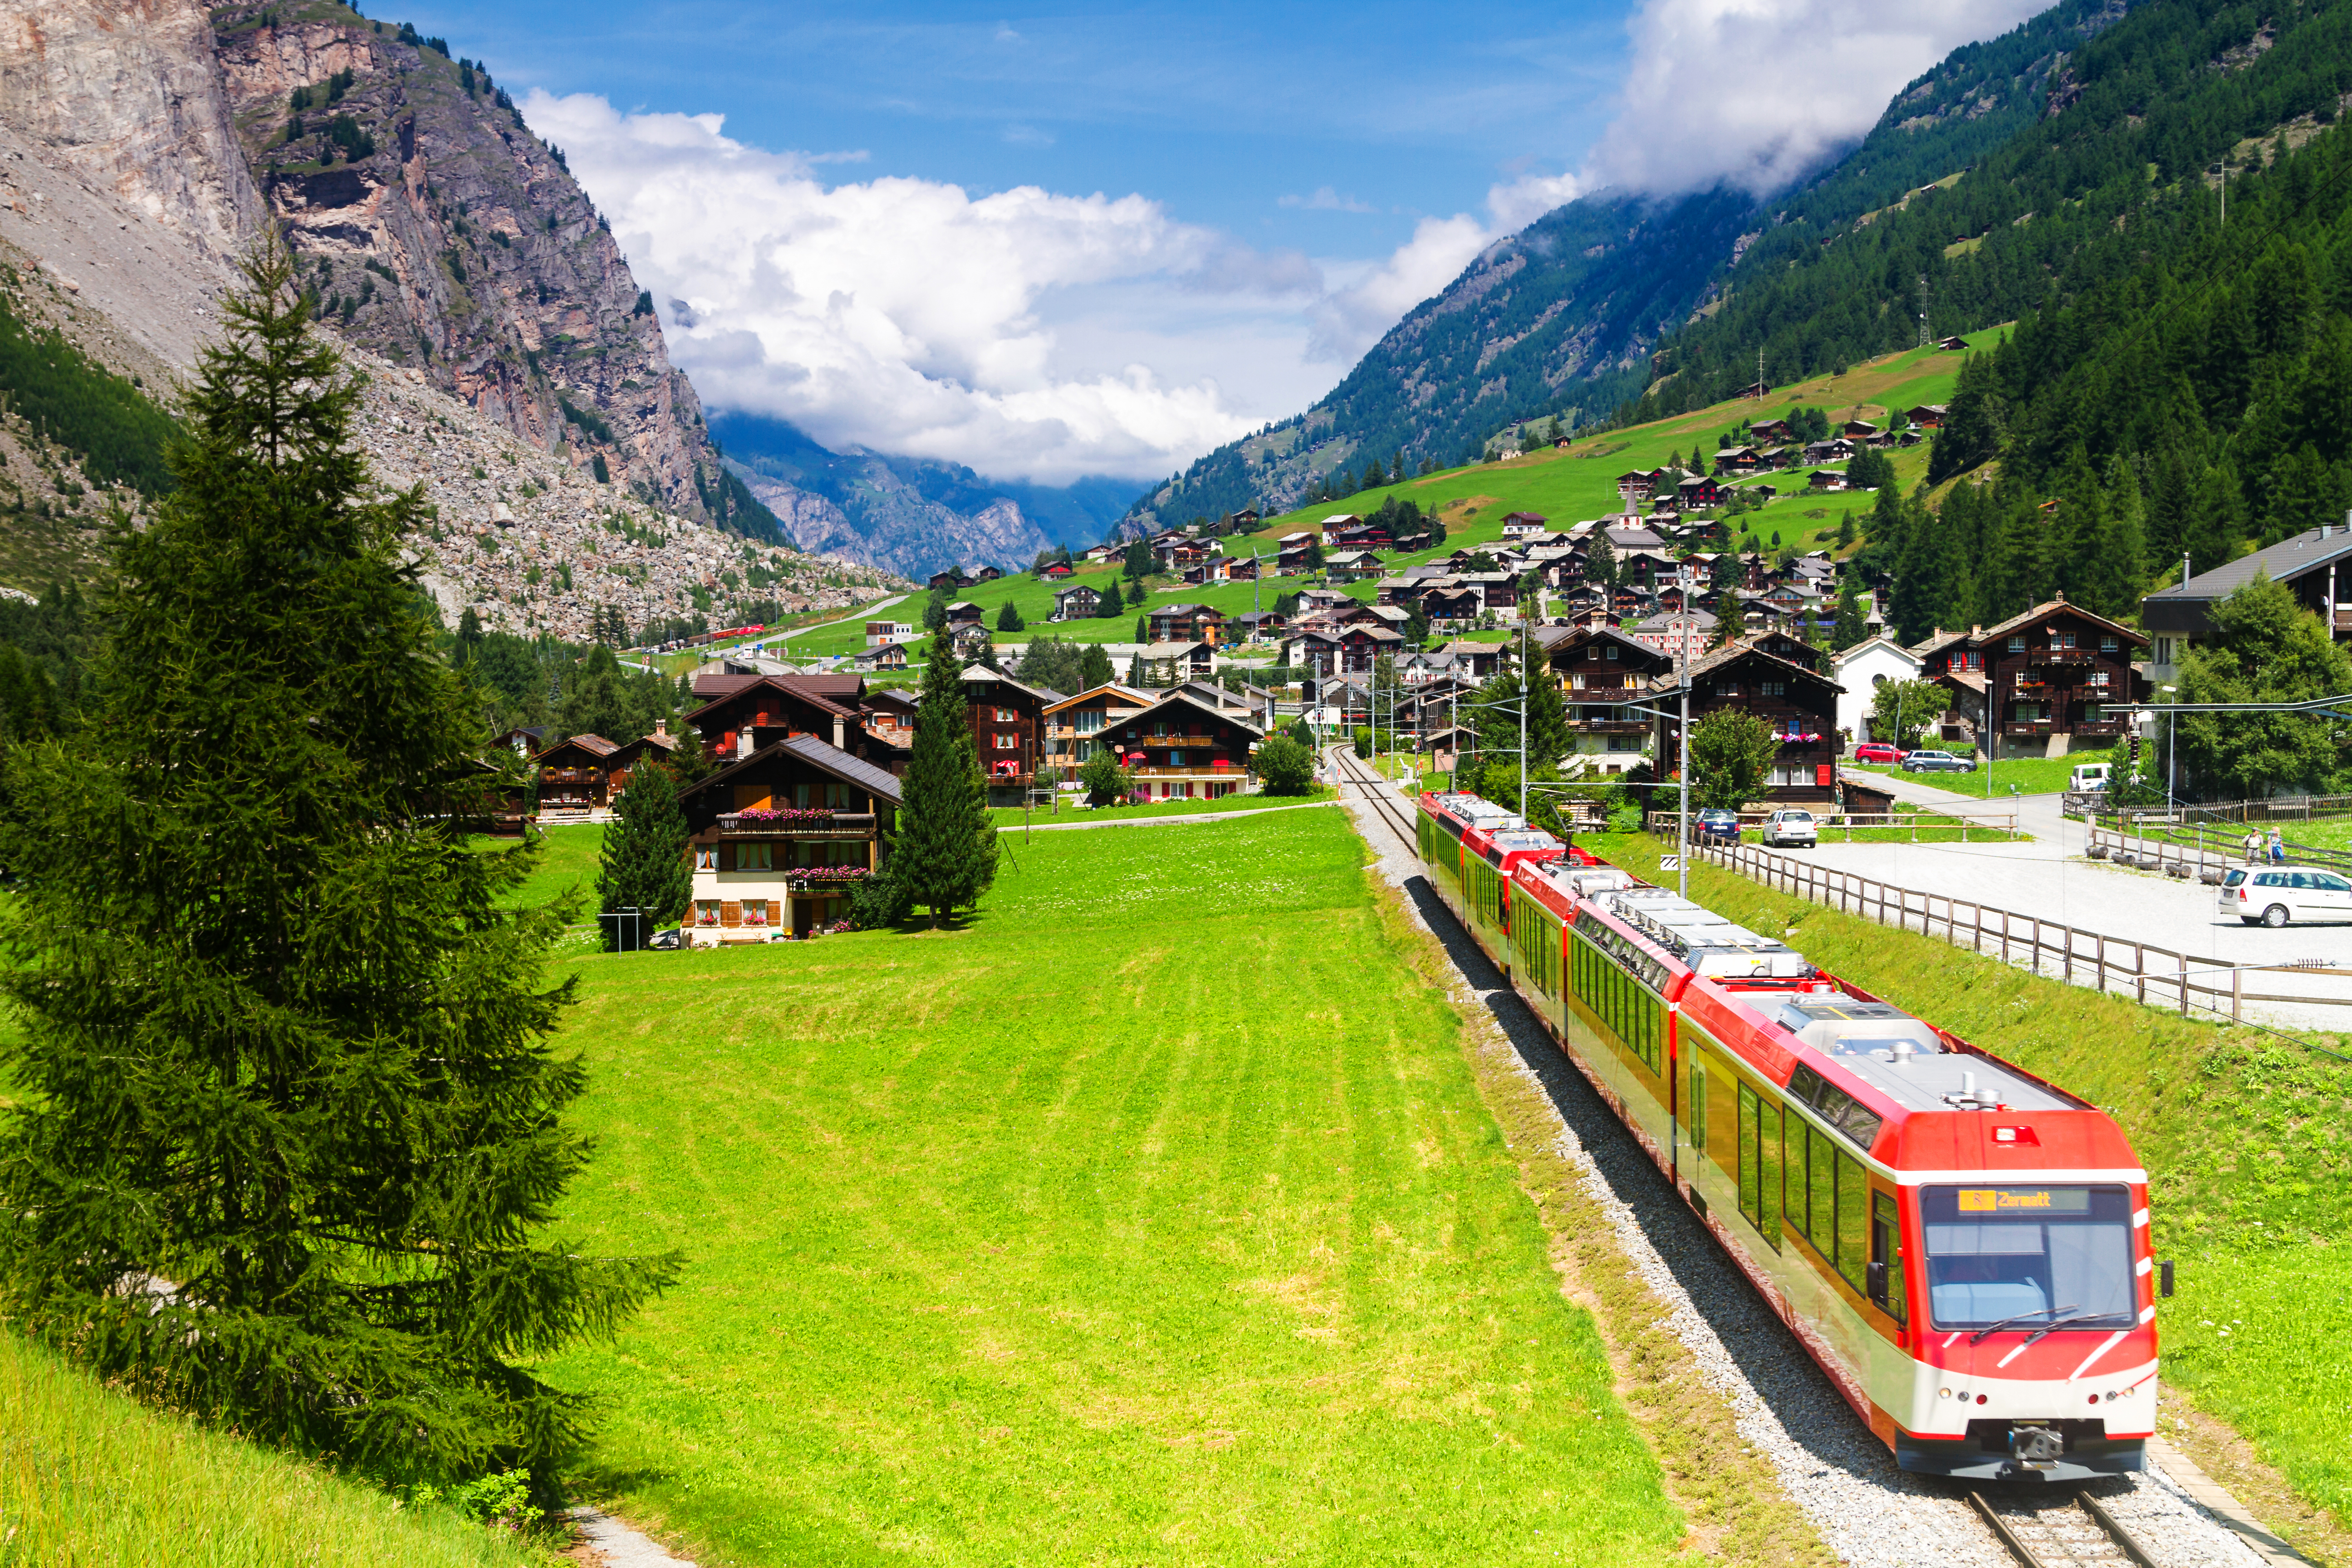 An Amazing Winter Vacation in Switzerland Finland with Your Family - Glacier Express Train in Switzerland
